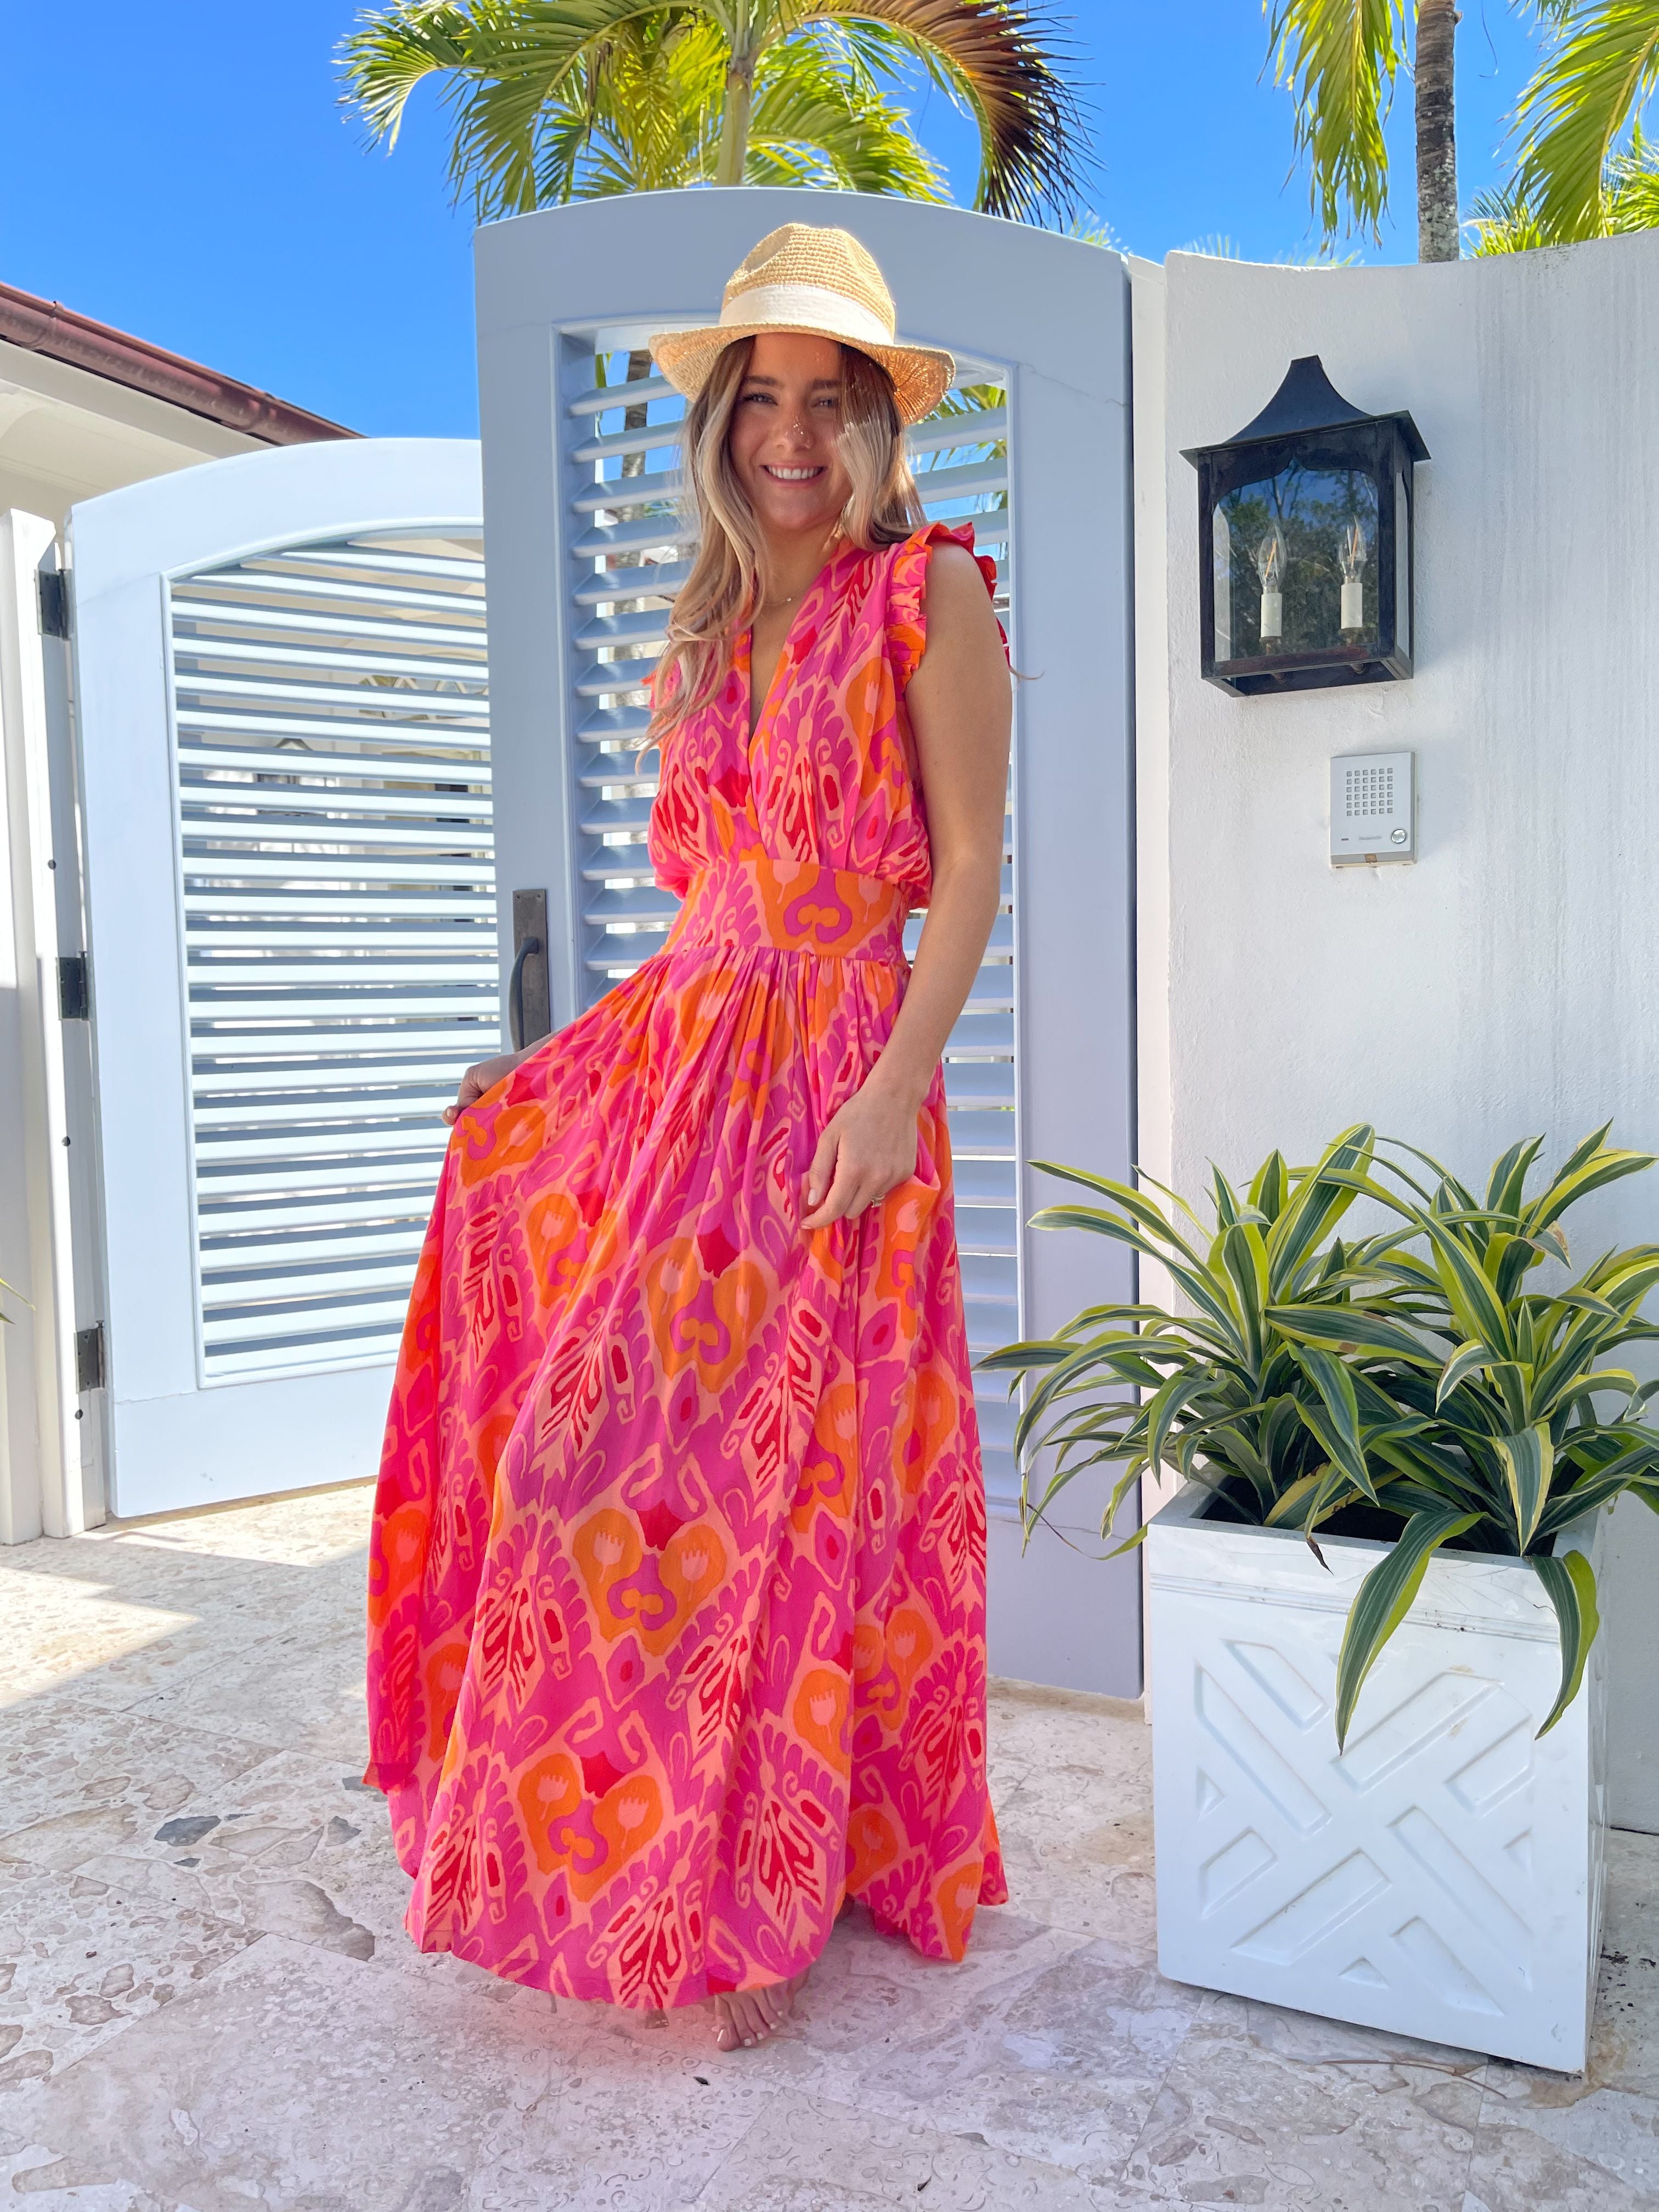 FEATHER &amp; FIND Star Dancer Maxi Dress Joy Frequency